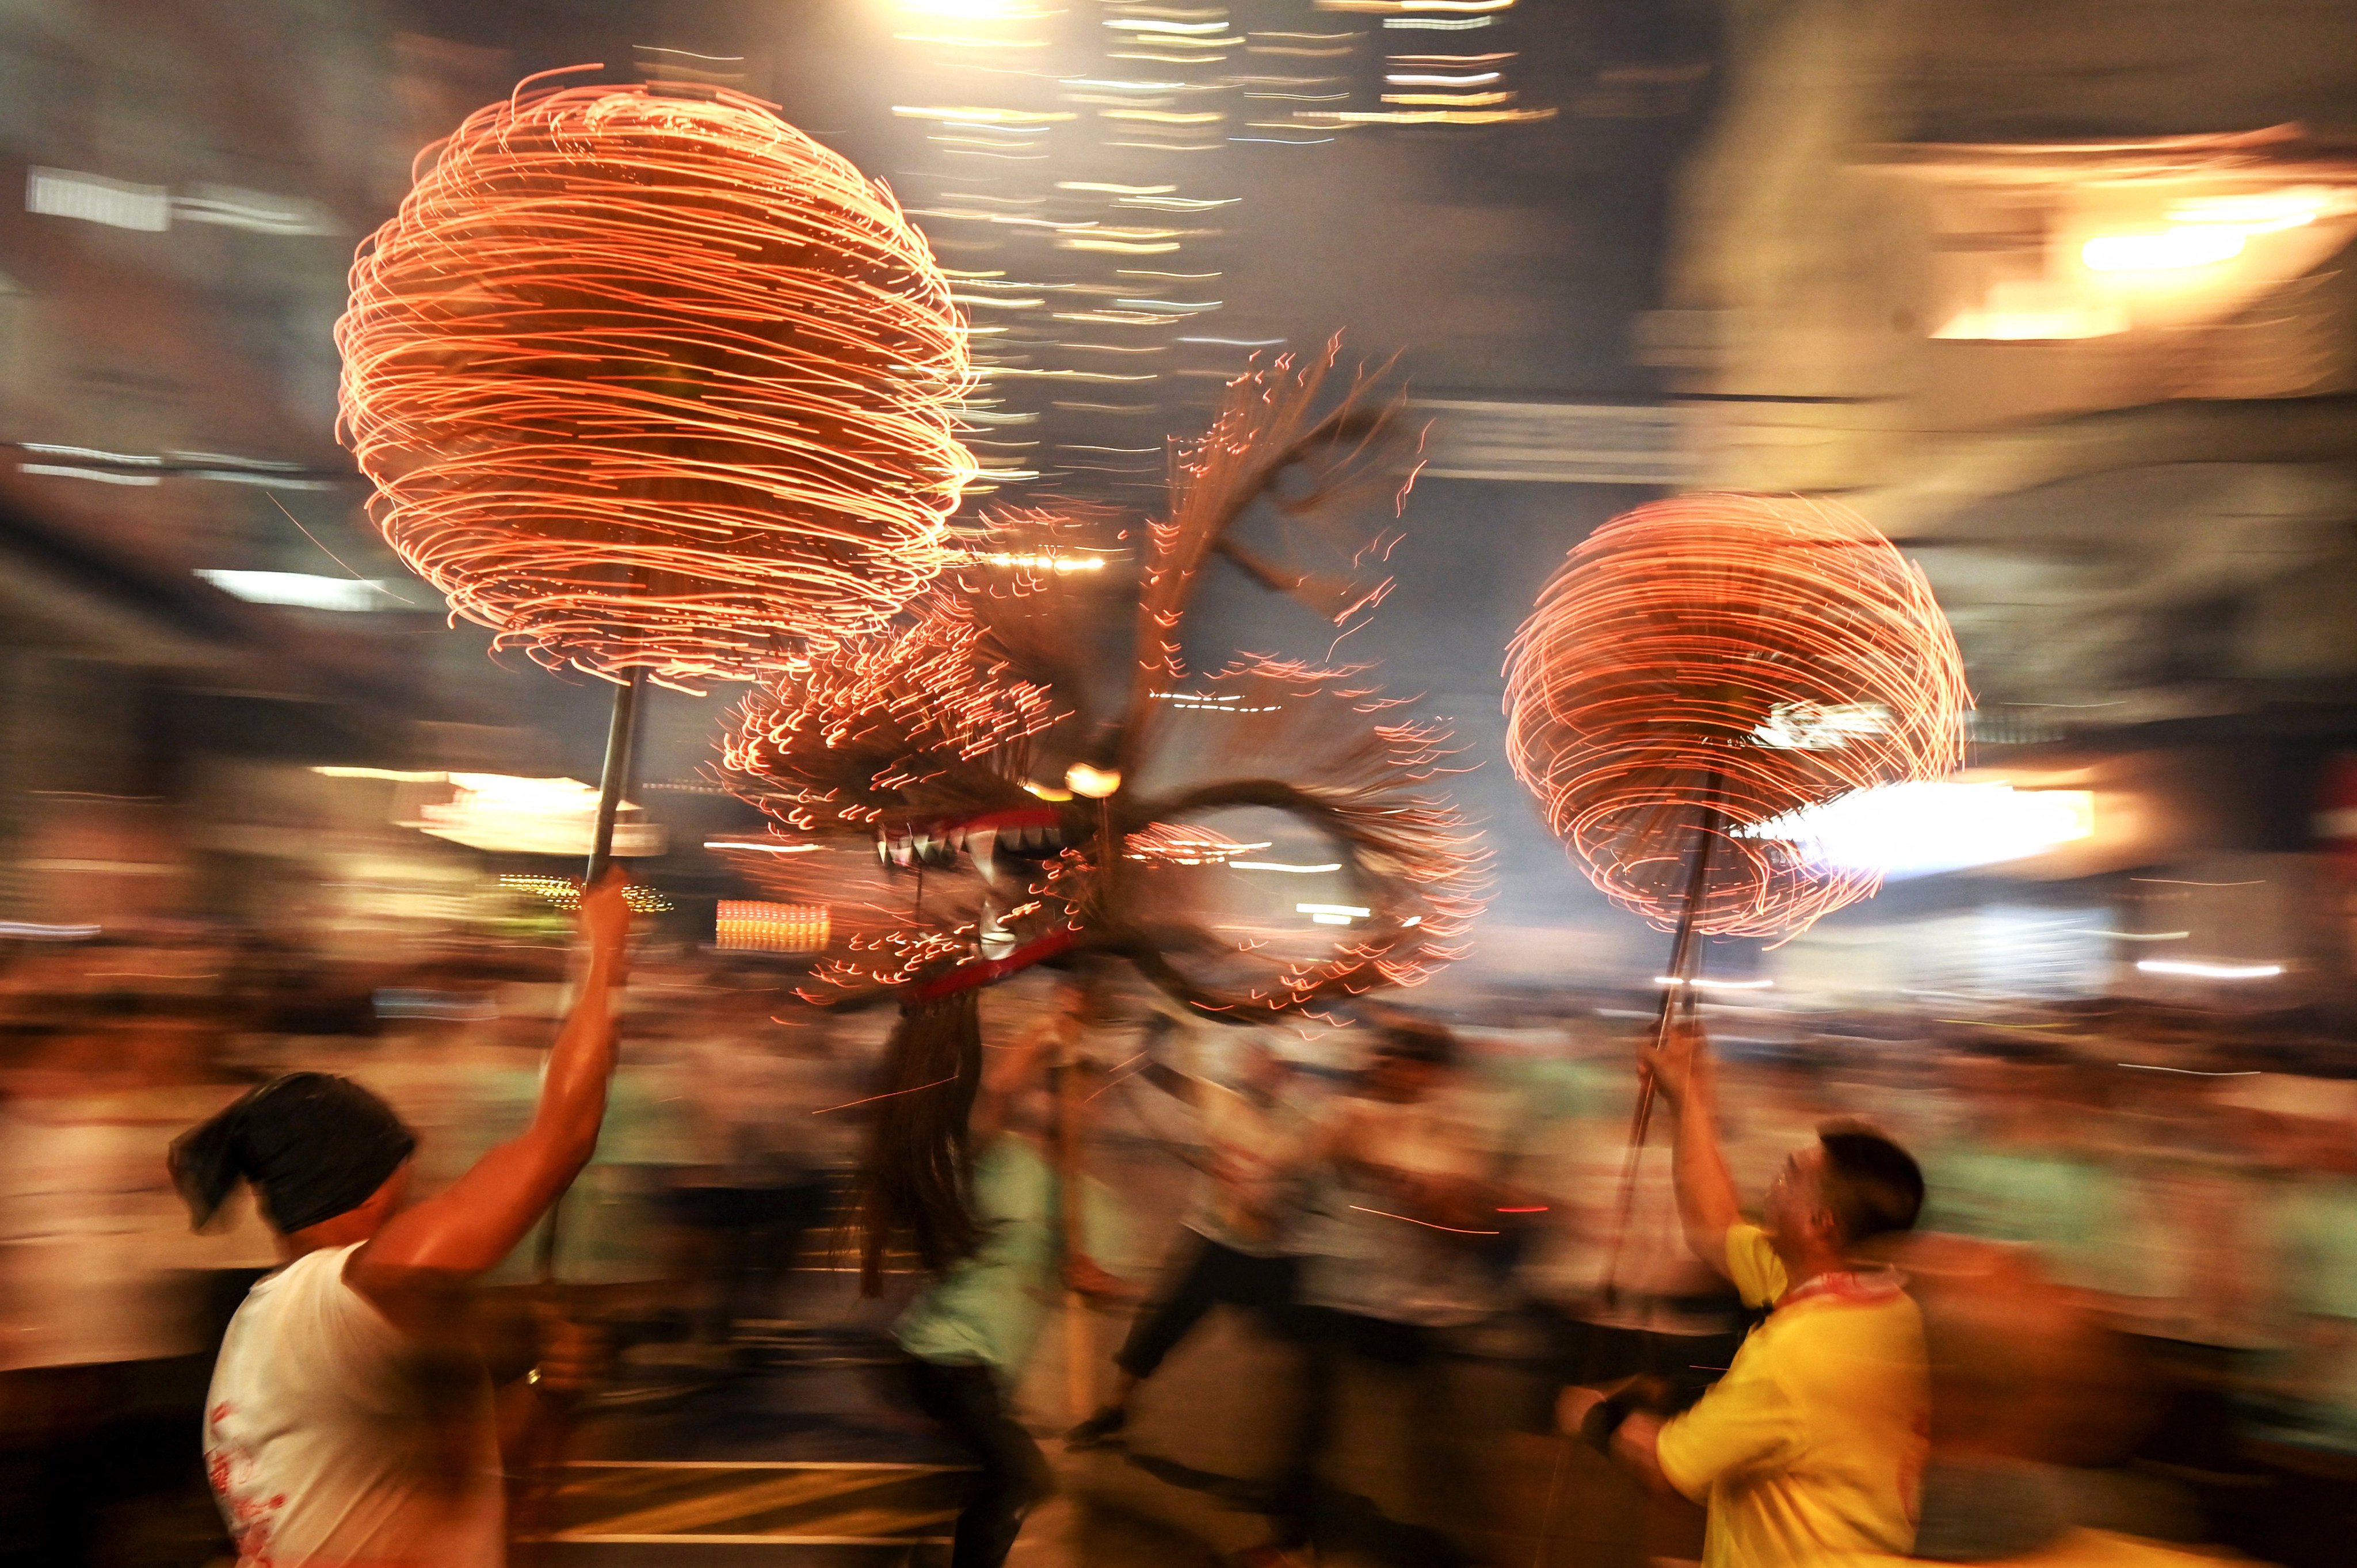 Members of the fire dragon dance team perform during the Tai Hang Fire Dragon parade in Hong Kong on September 29, 2023. The police did a superb job of controlling the event, Jason Wordie says. Photo: AFP